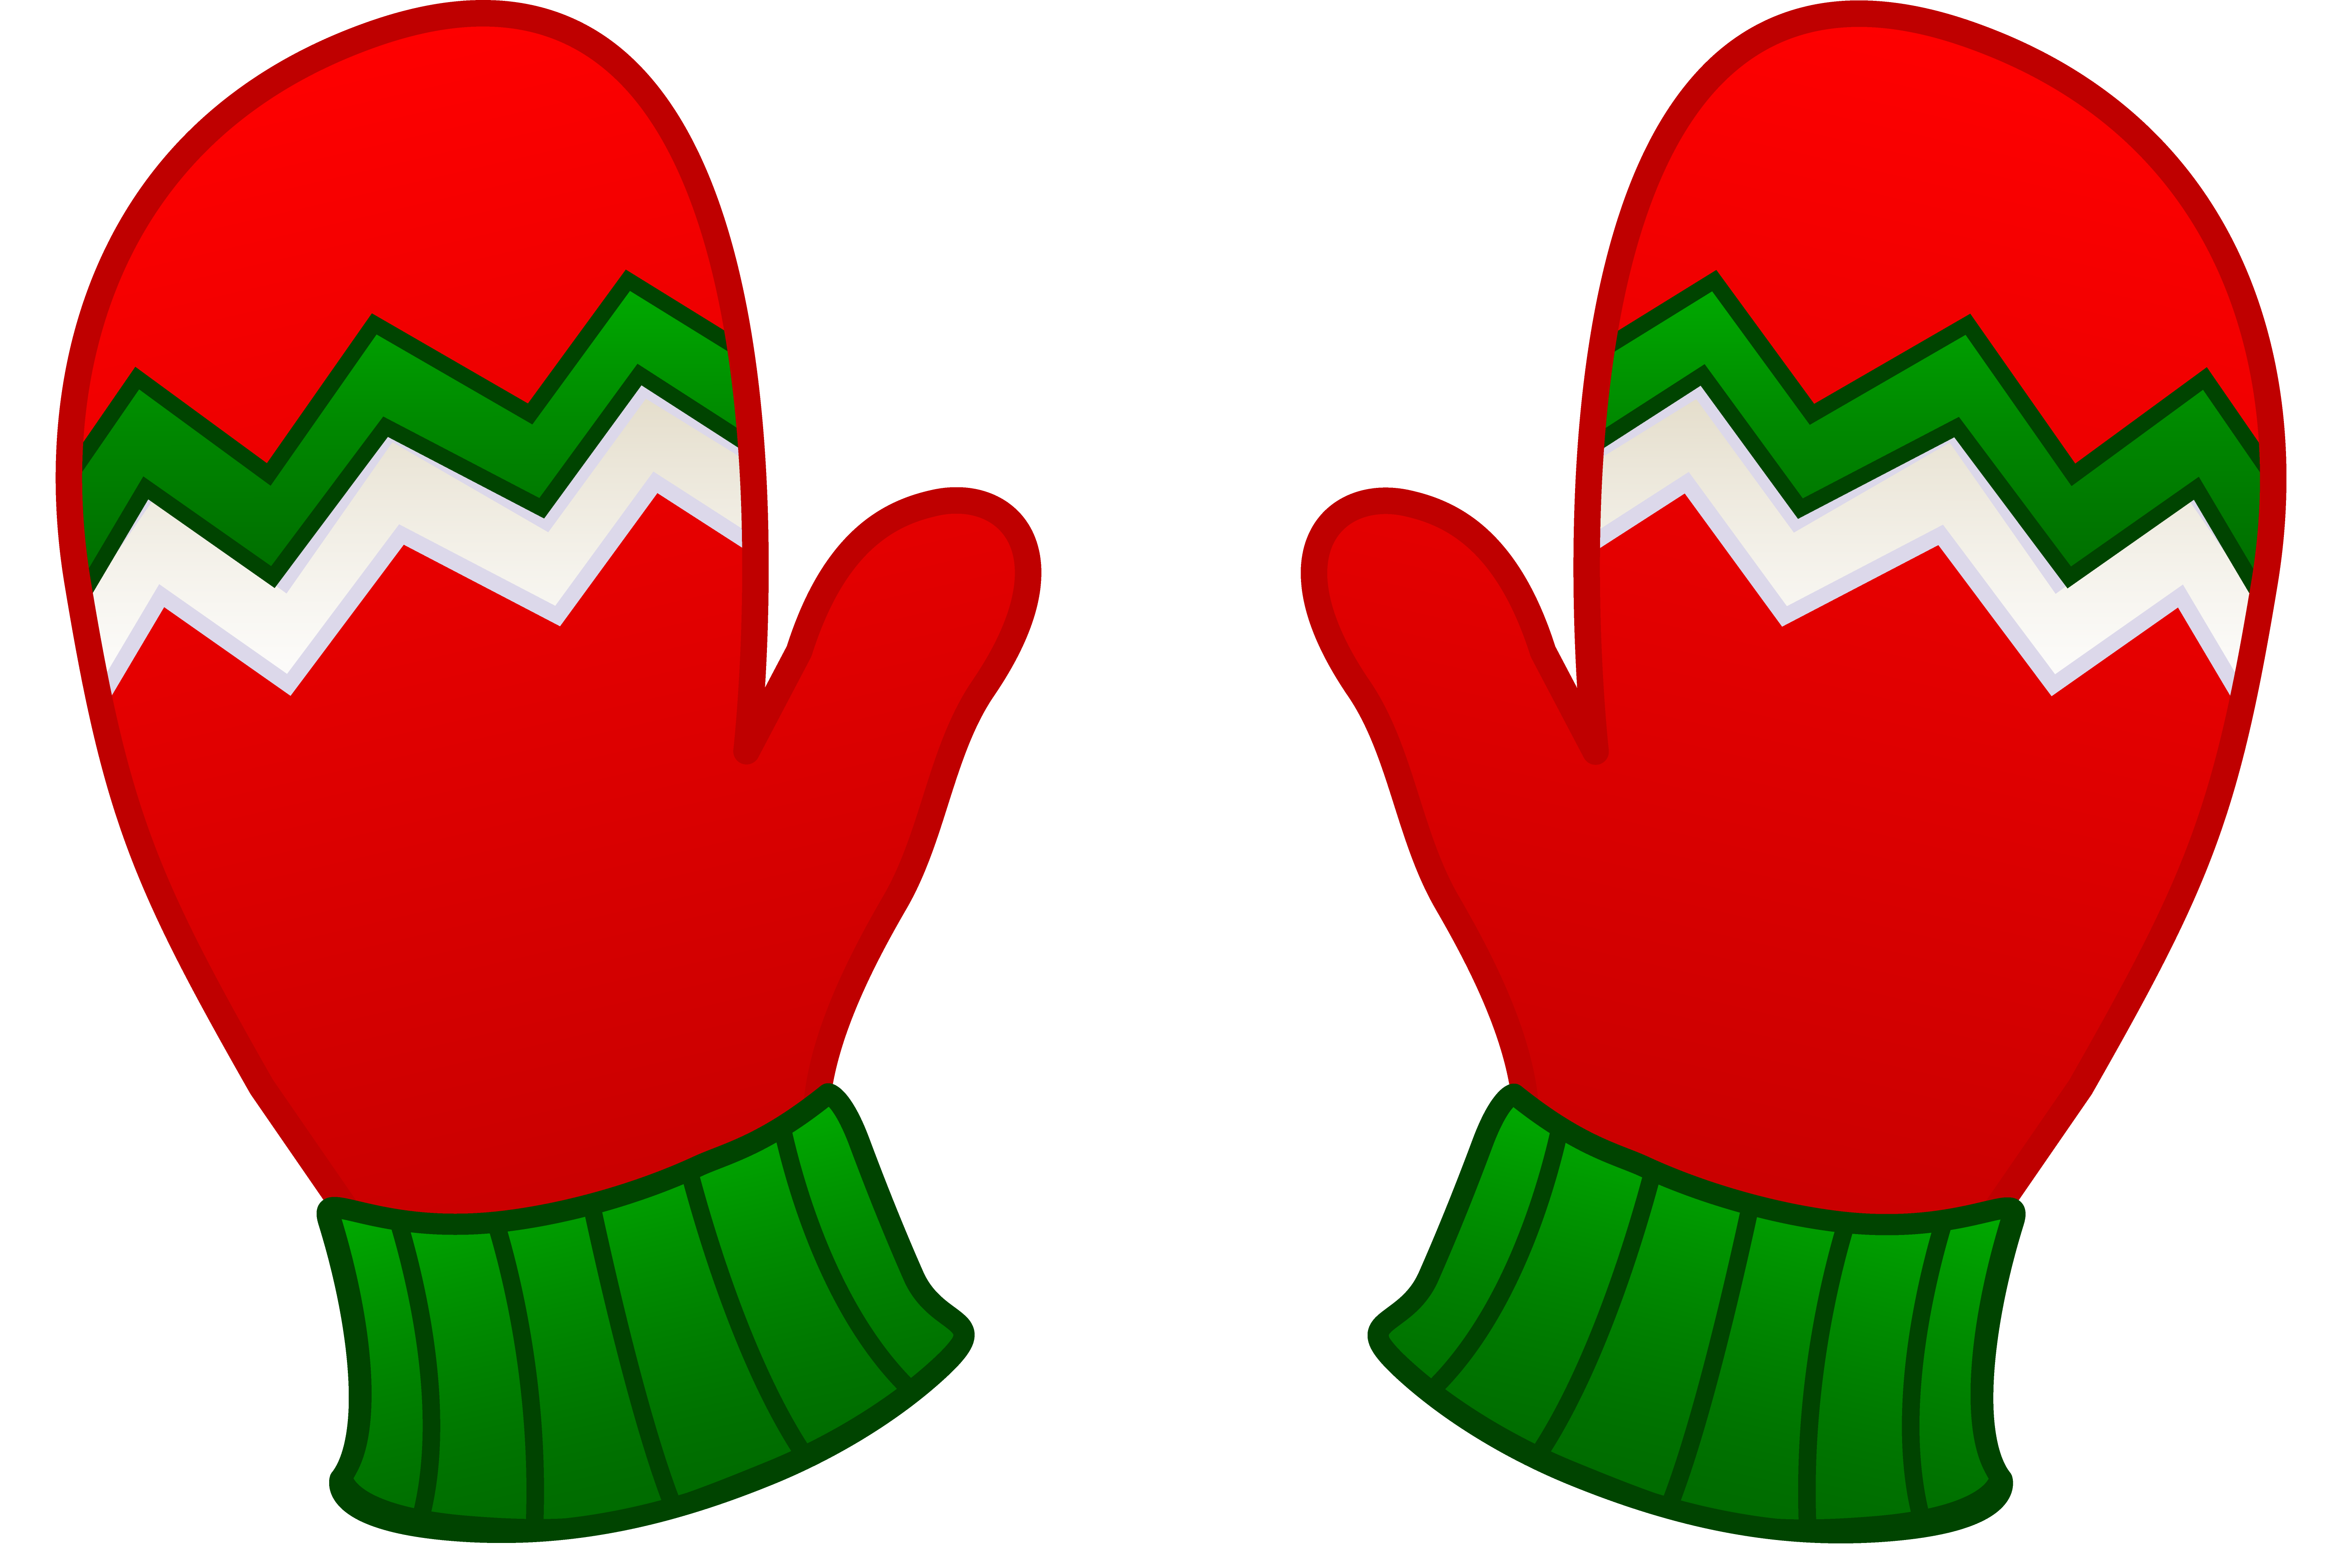 Fight clipart defensive. Free mitten cliparts download